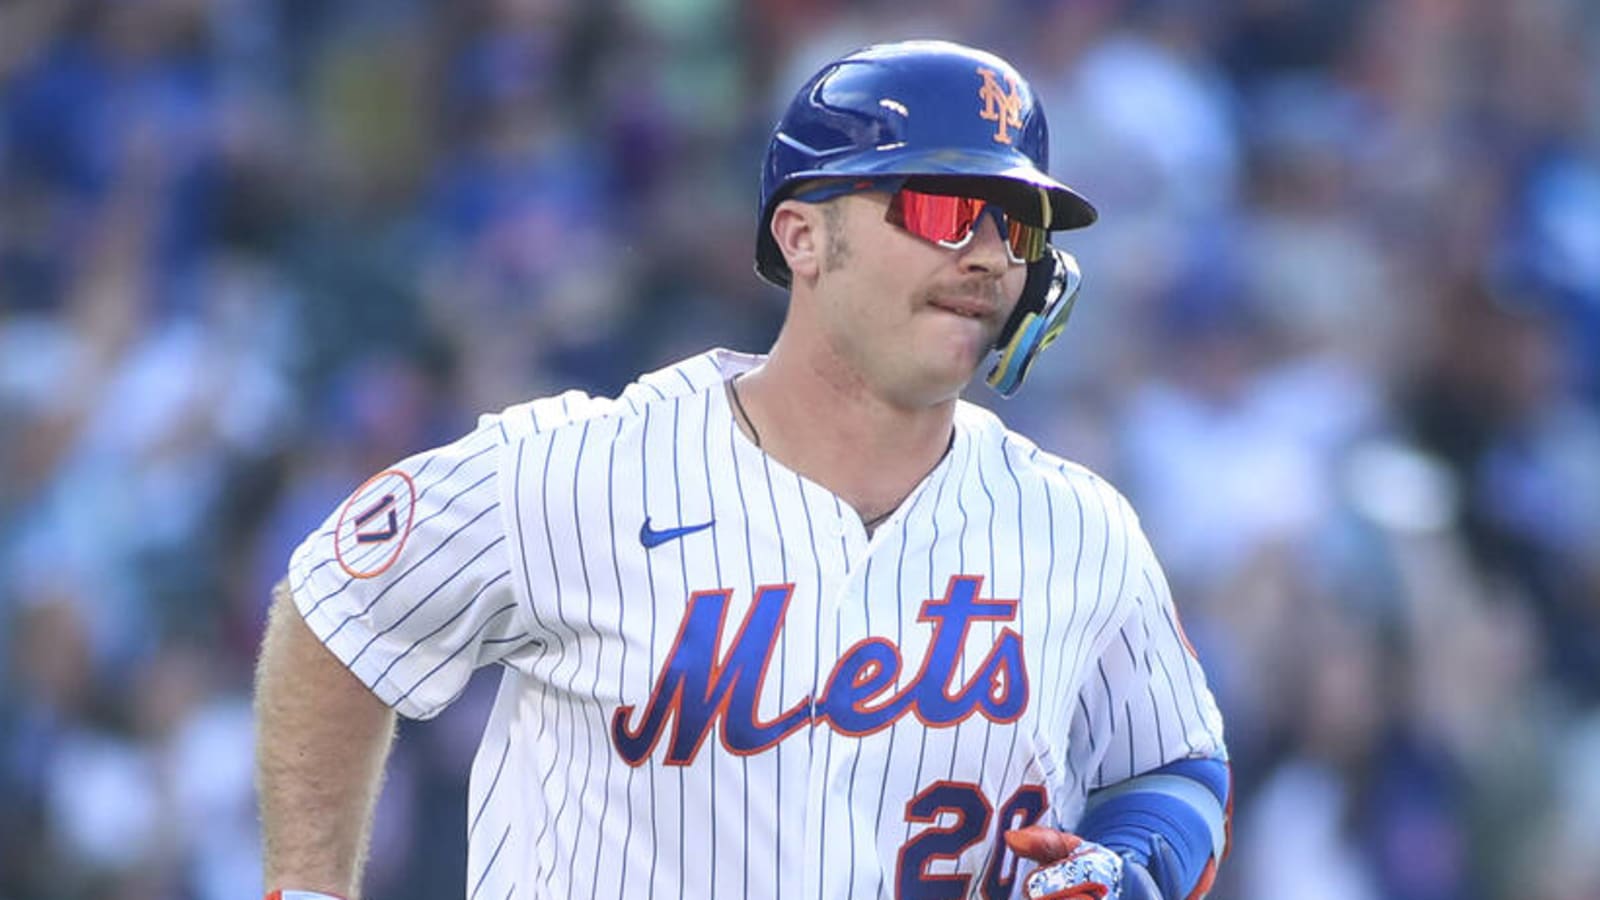 Pete Alonso will attempt to defend back-to-back Home Run Derby